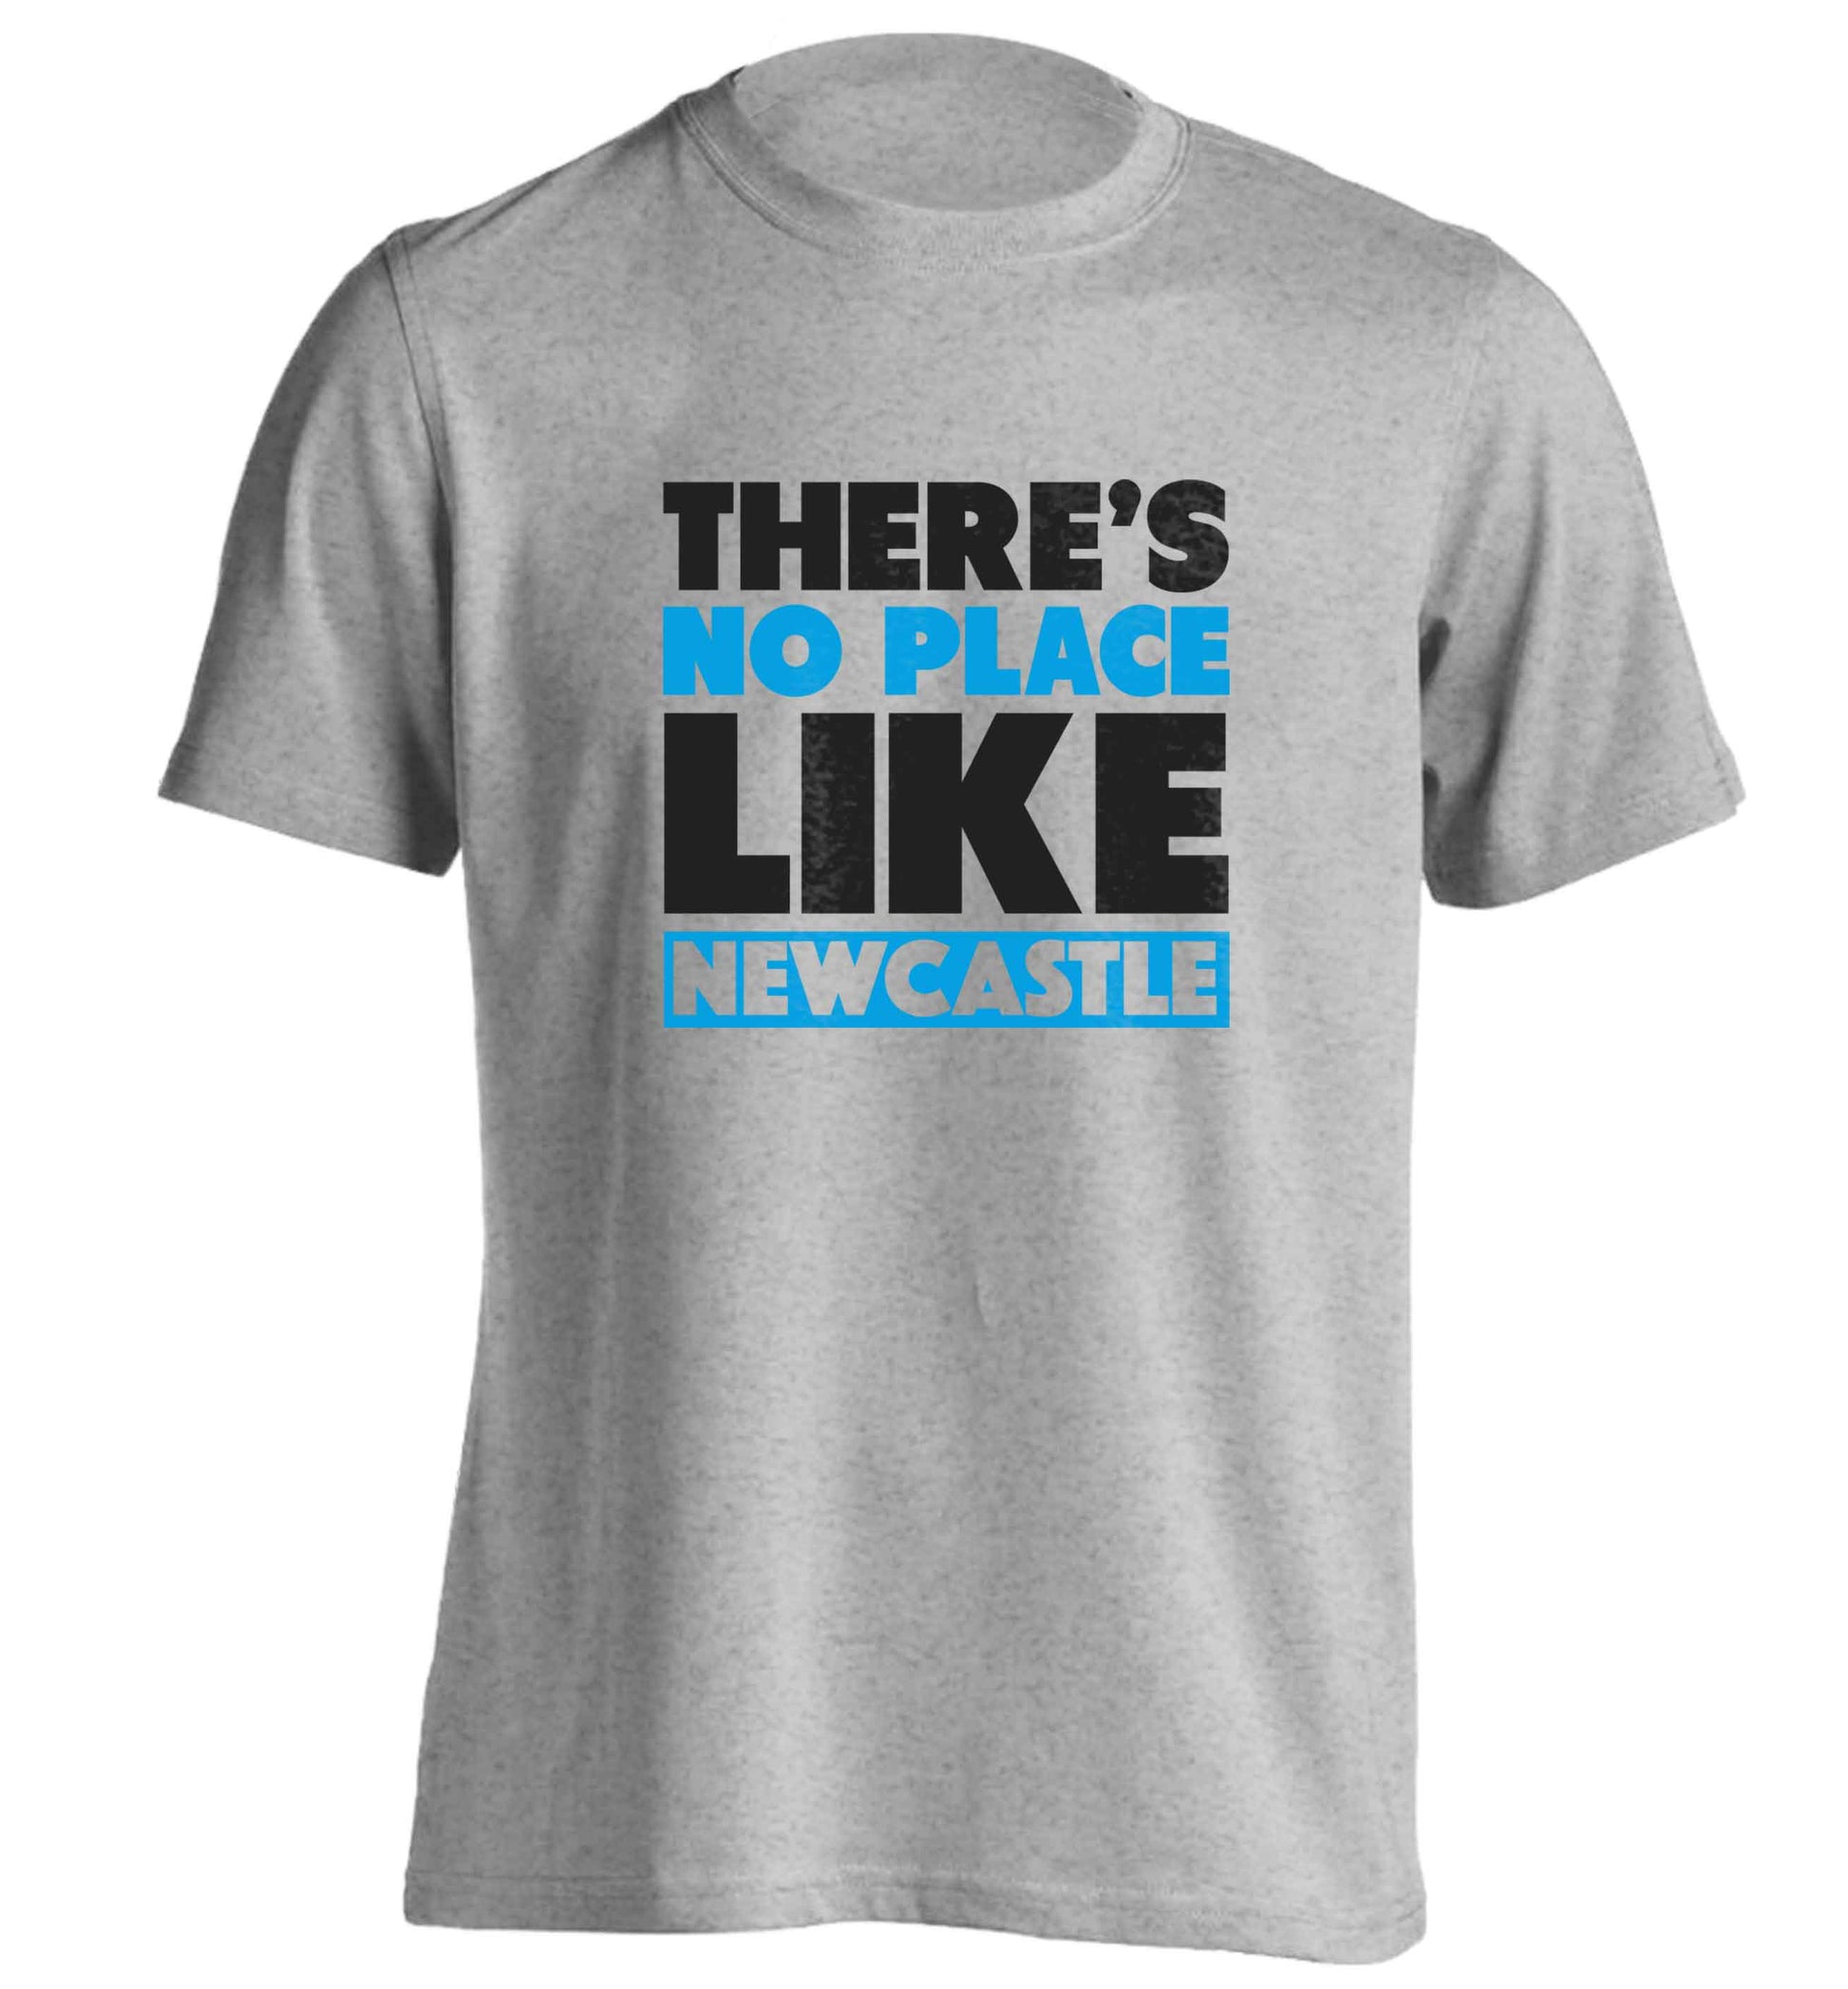 There's no place like Newcastle adults unisex grey Tshirt 2XL